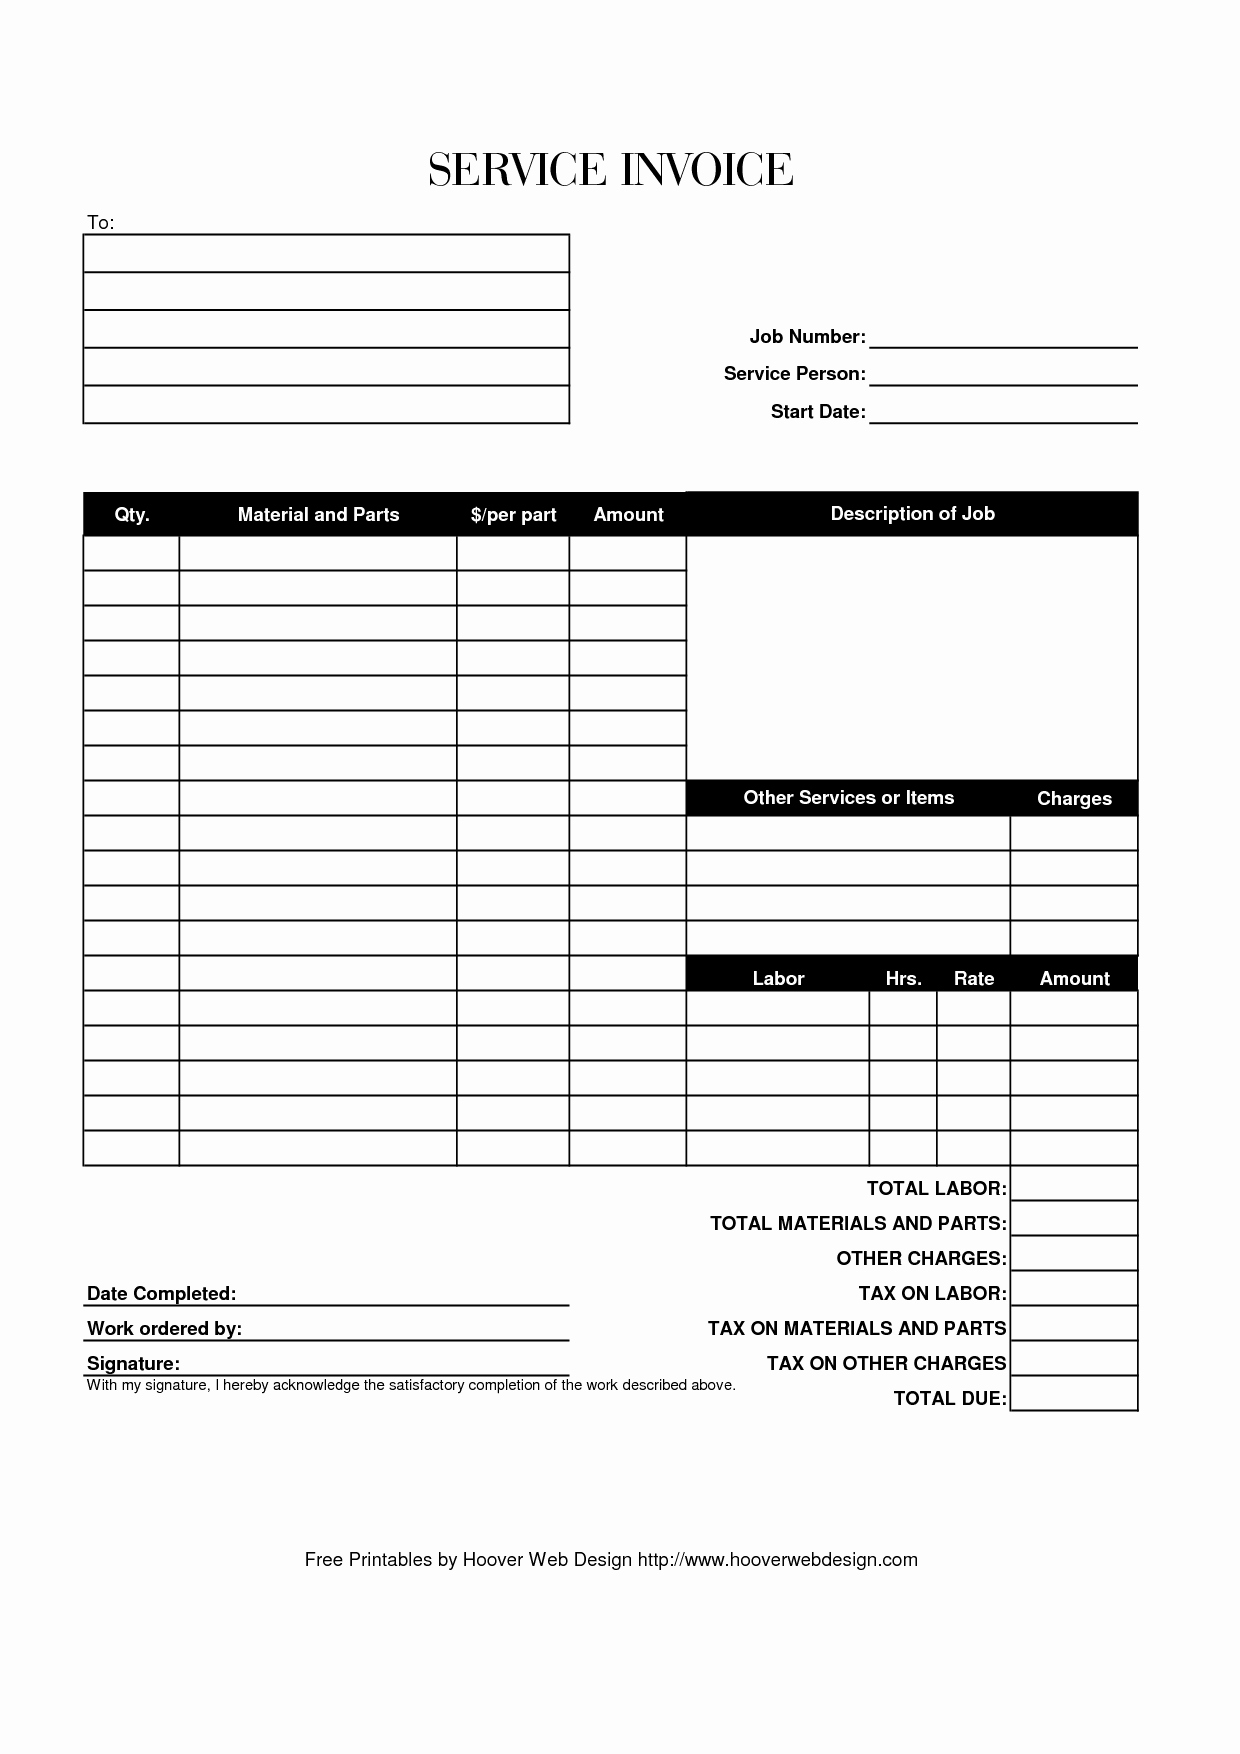 Free Printable Work Invoice Template With Labor Plus Invoices - Free Printable Work Invoices